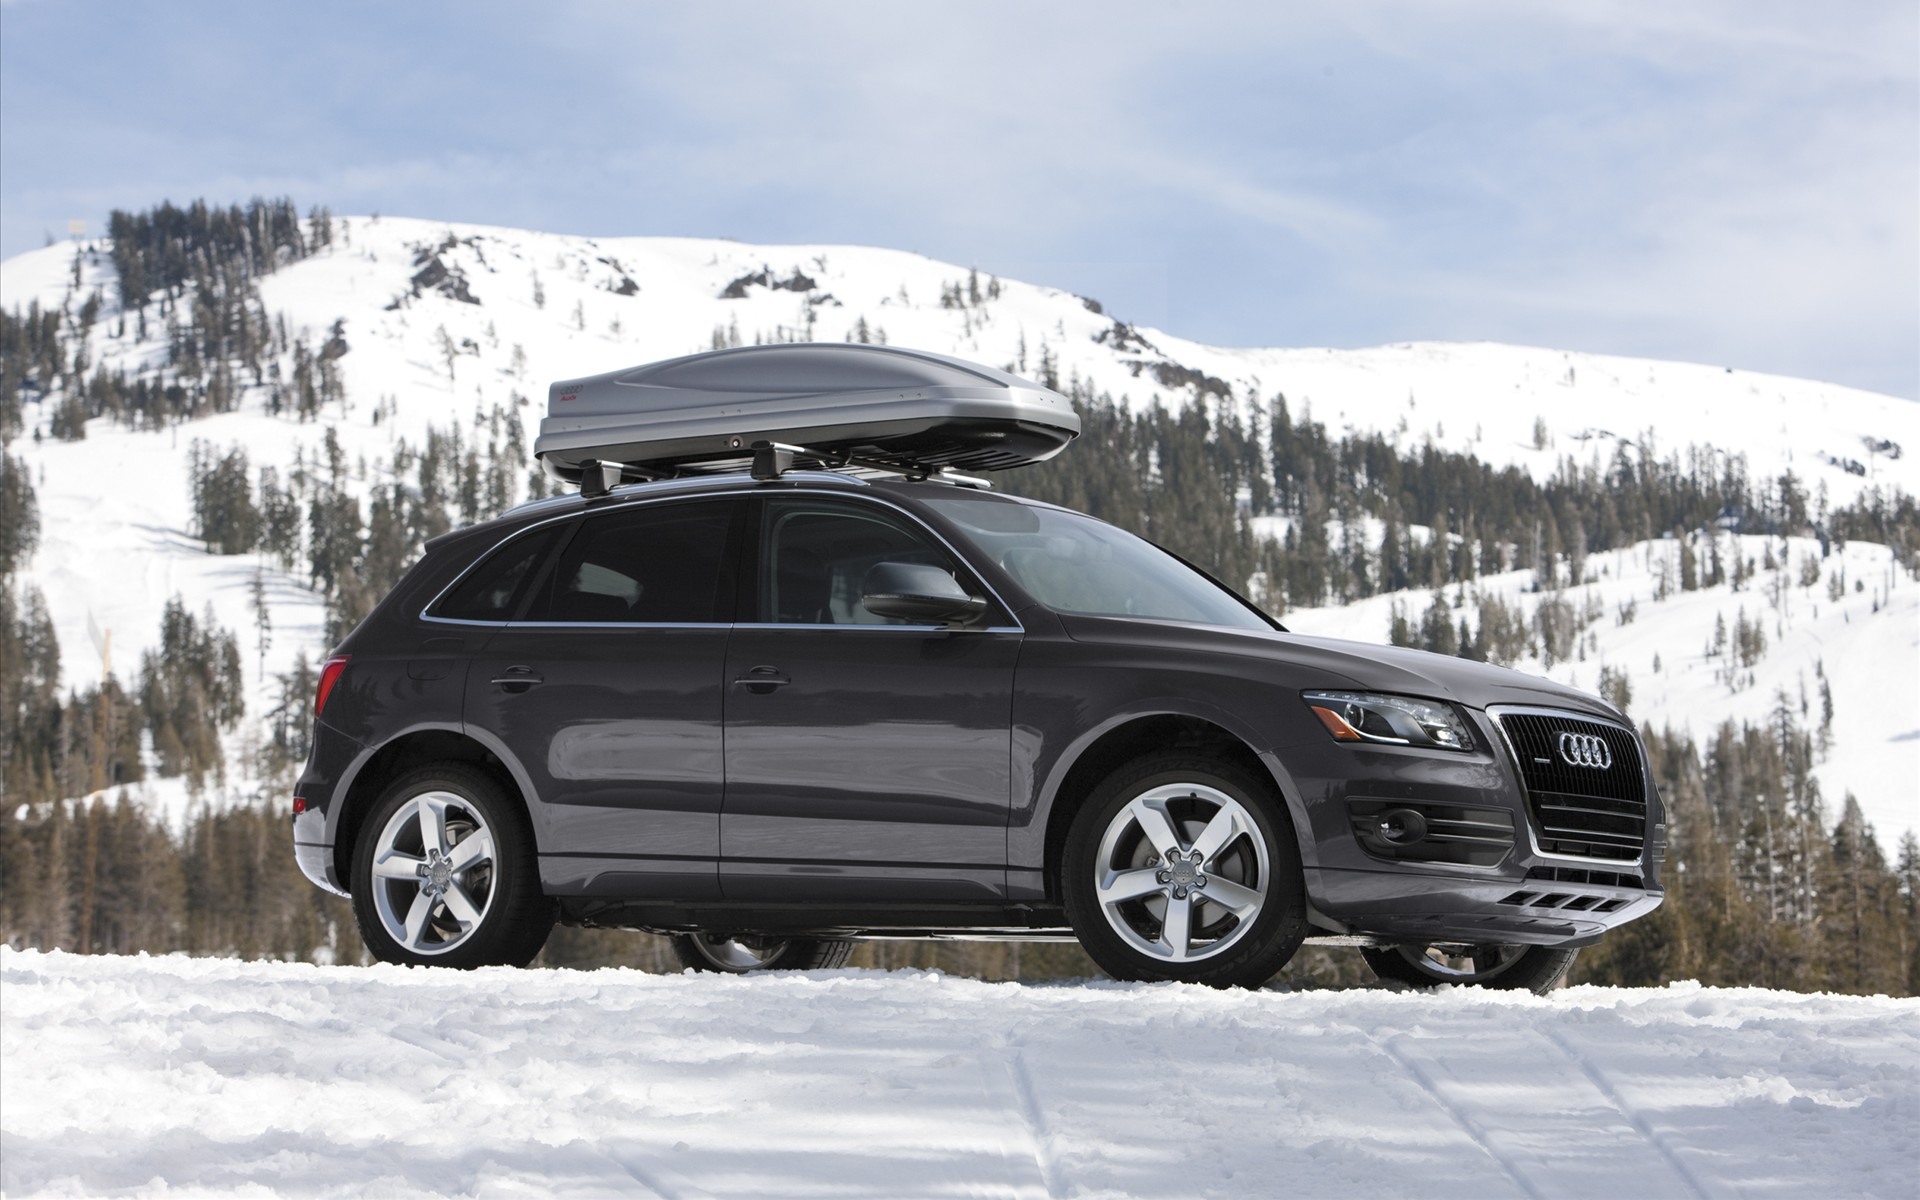 Awesome Audi Q5 Wallpaper | Full HD Pictures